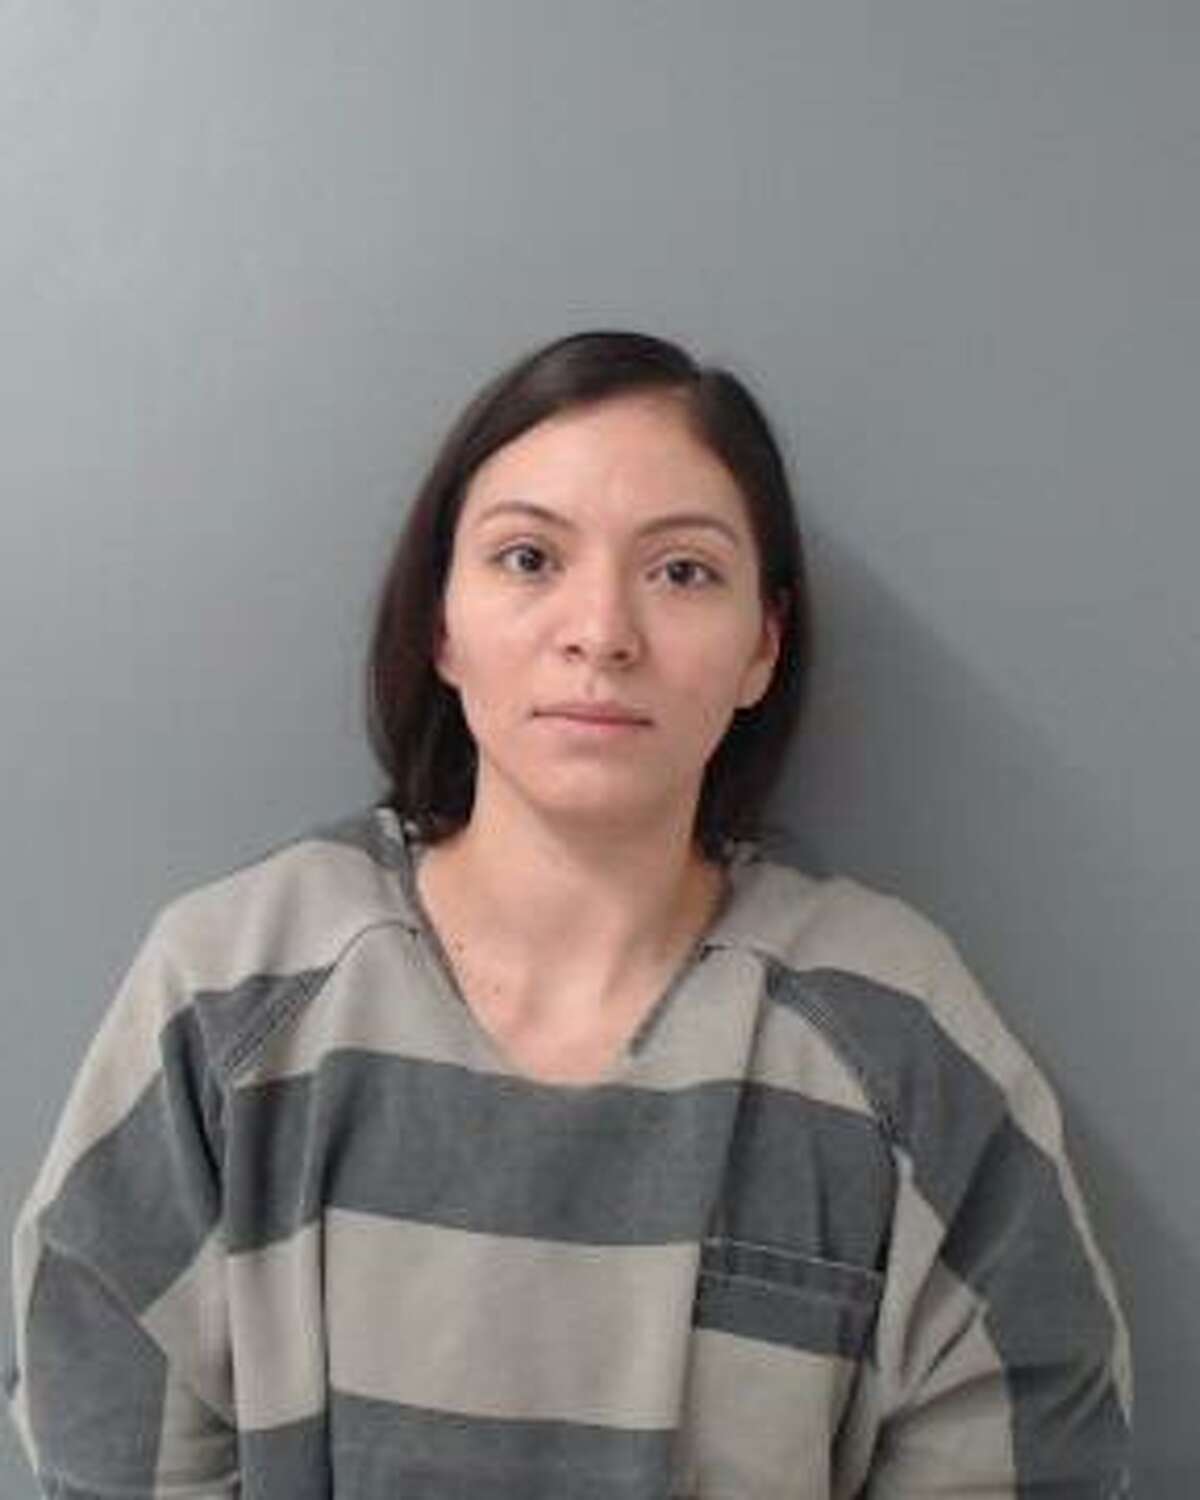 UISD teacher arrested on harassment charge image pic